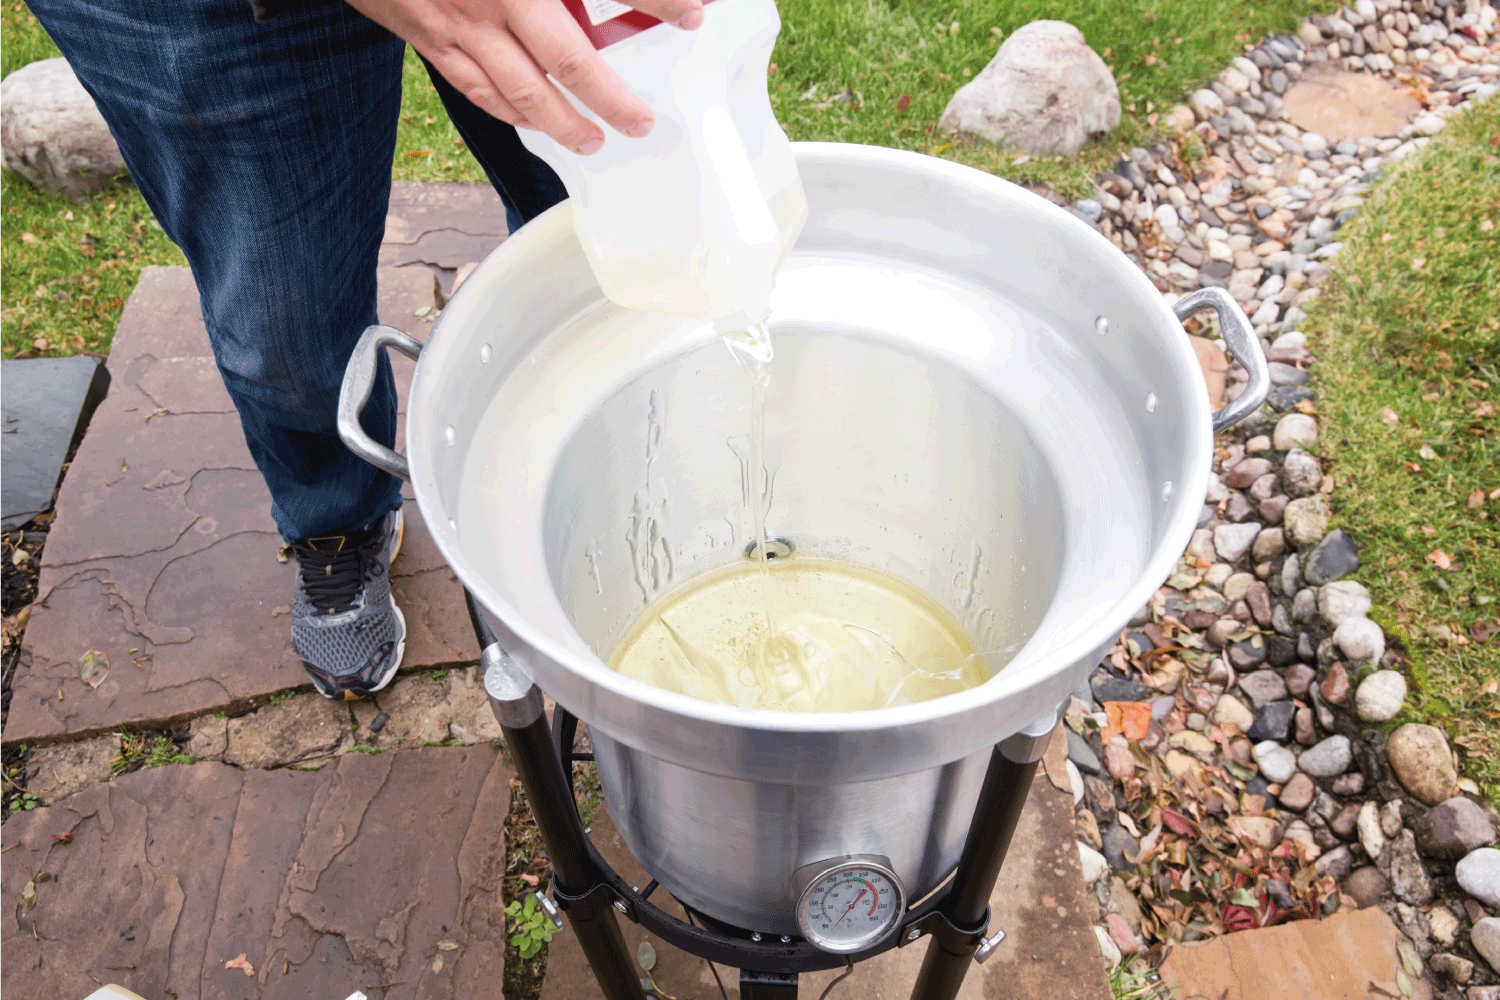 Cooking oil being poured into an outdoor deep fryer. This is being done in preparation of cooking a turkey for Thanksgiving